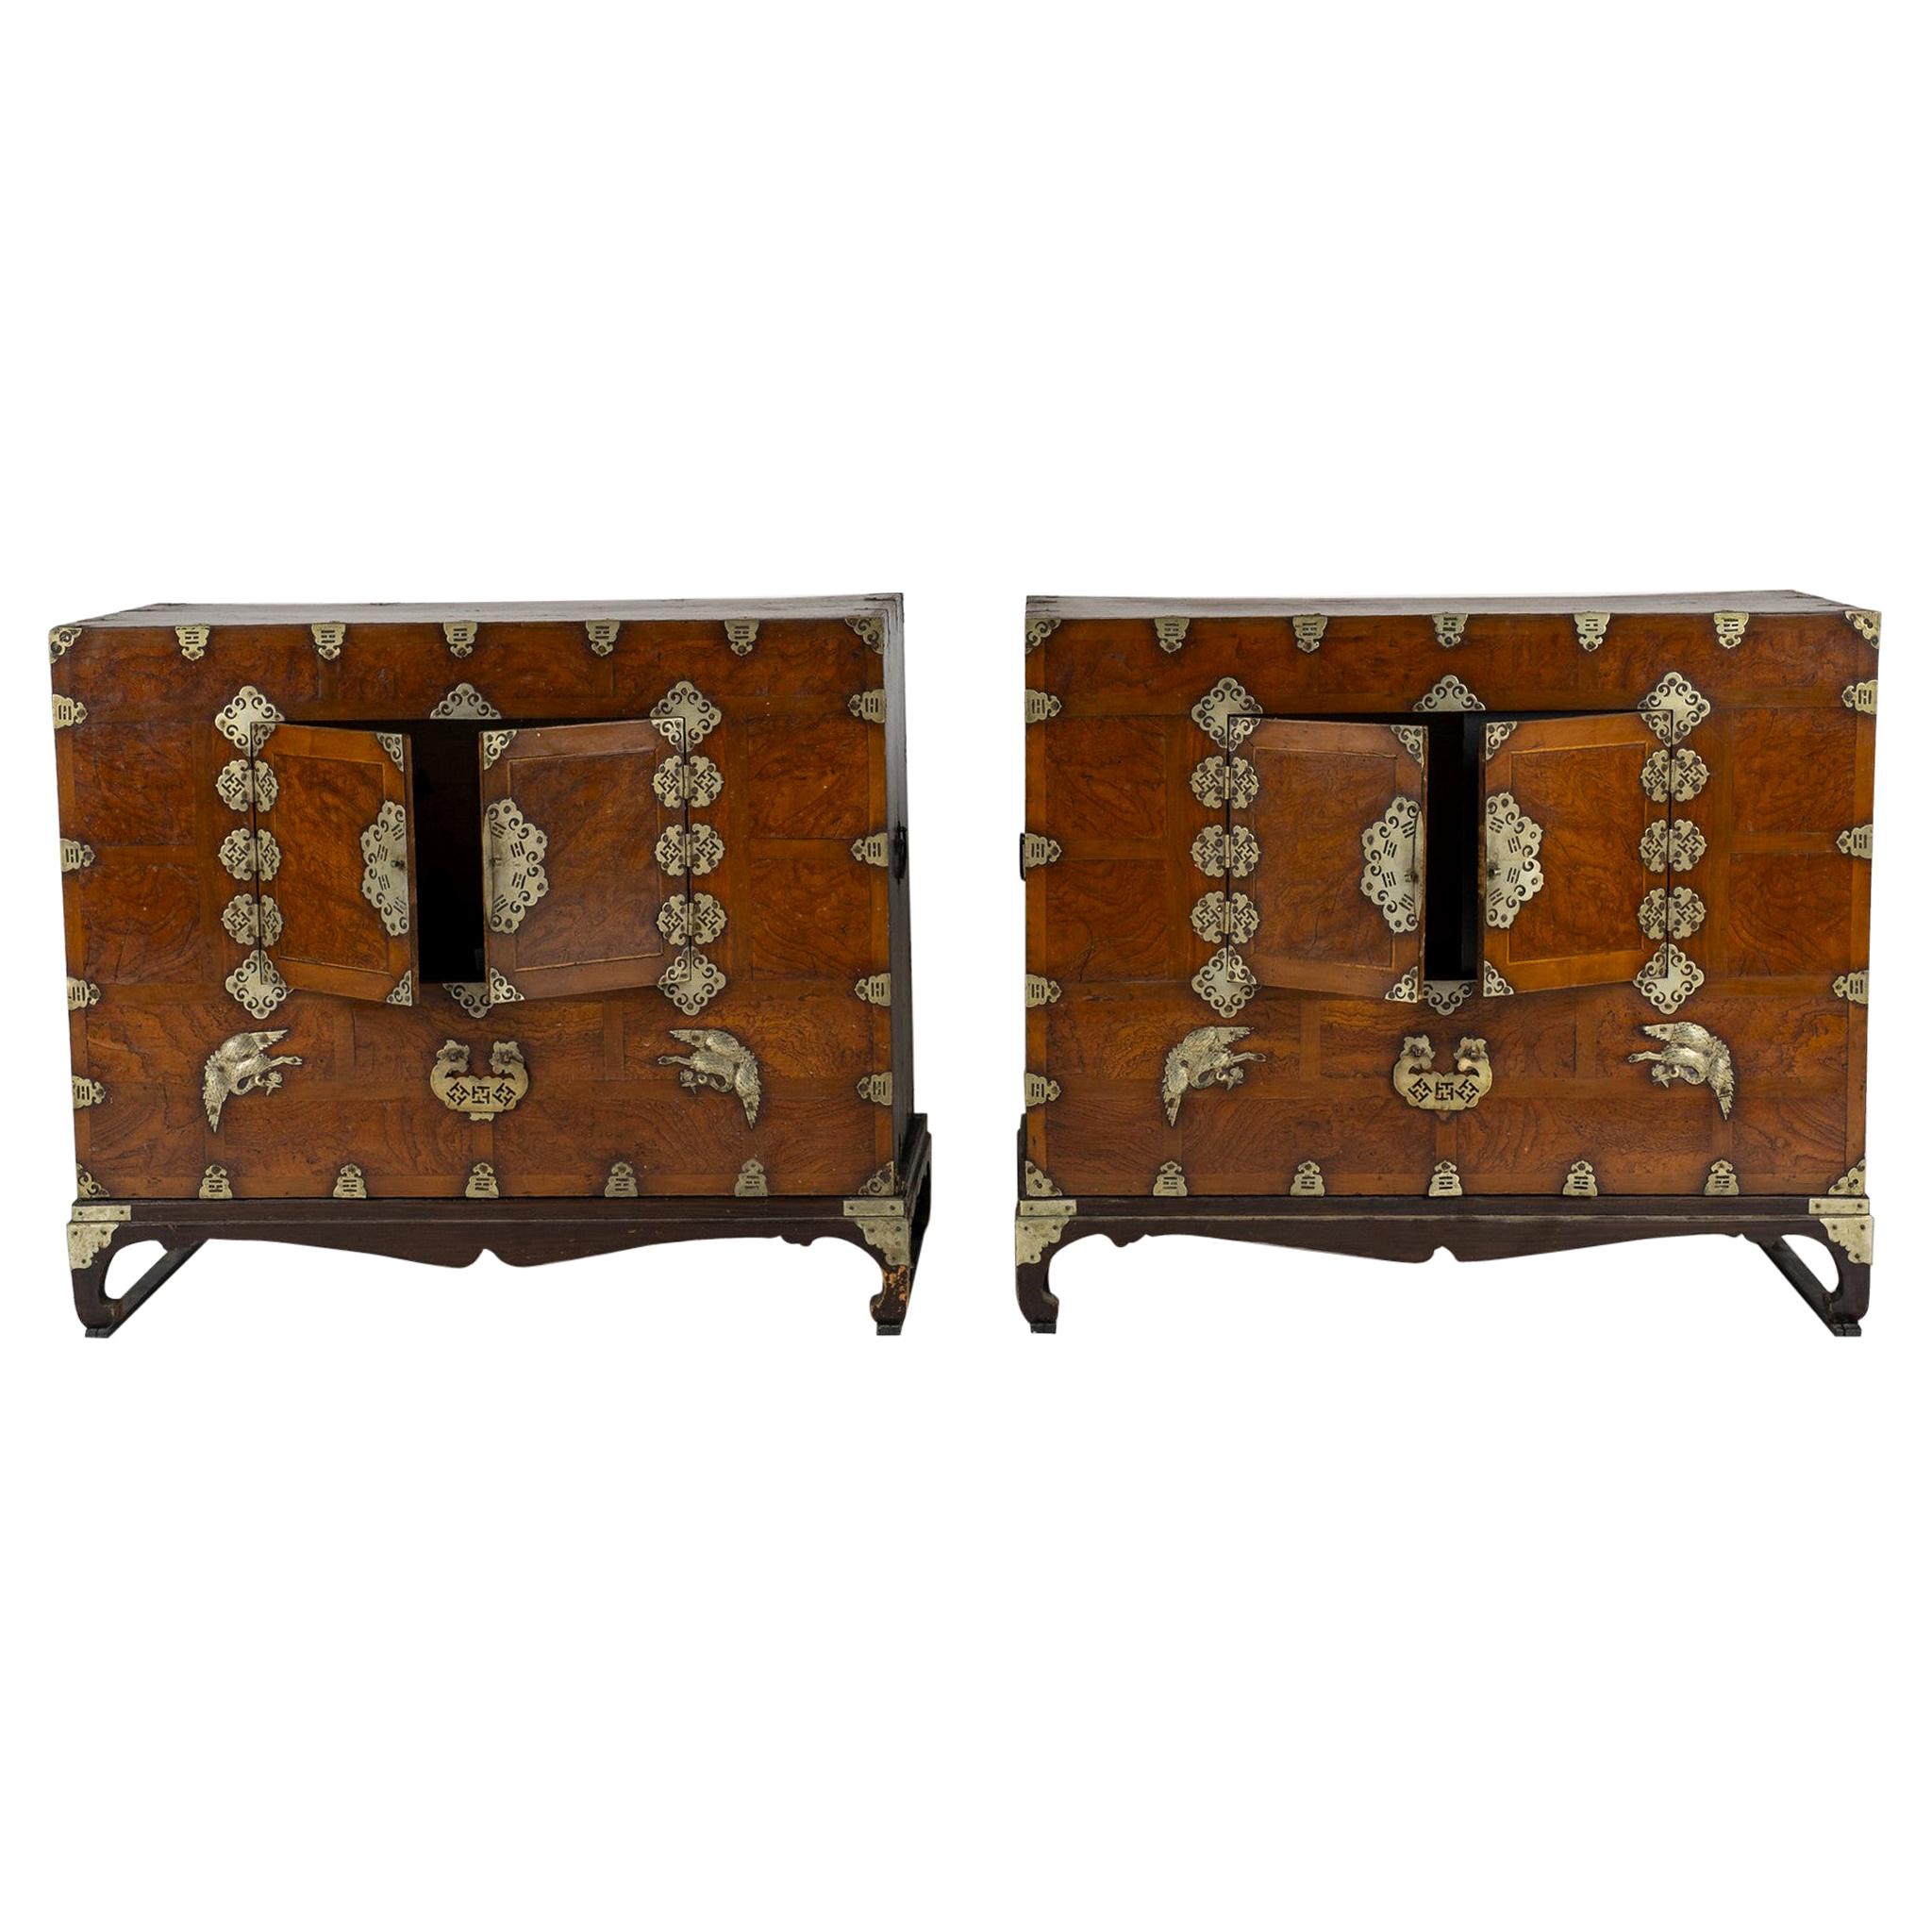 Pair of 19th century Korean side chests with small double doors and traditional cut brass hardware. Hidden sliding interior panels and small storage boxes within. Cabinets each sit atop hand carved bases that are not attached. Two chests can be